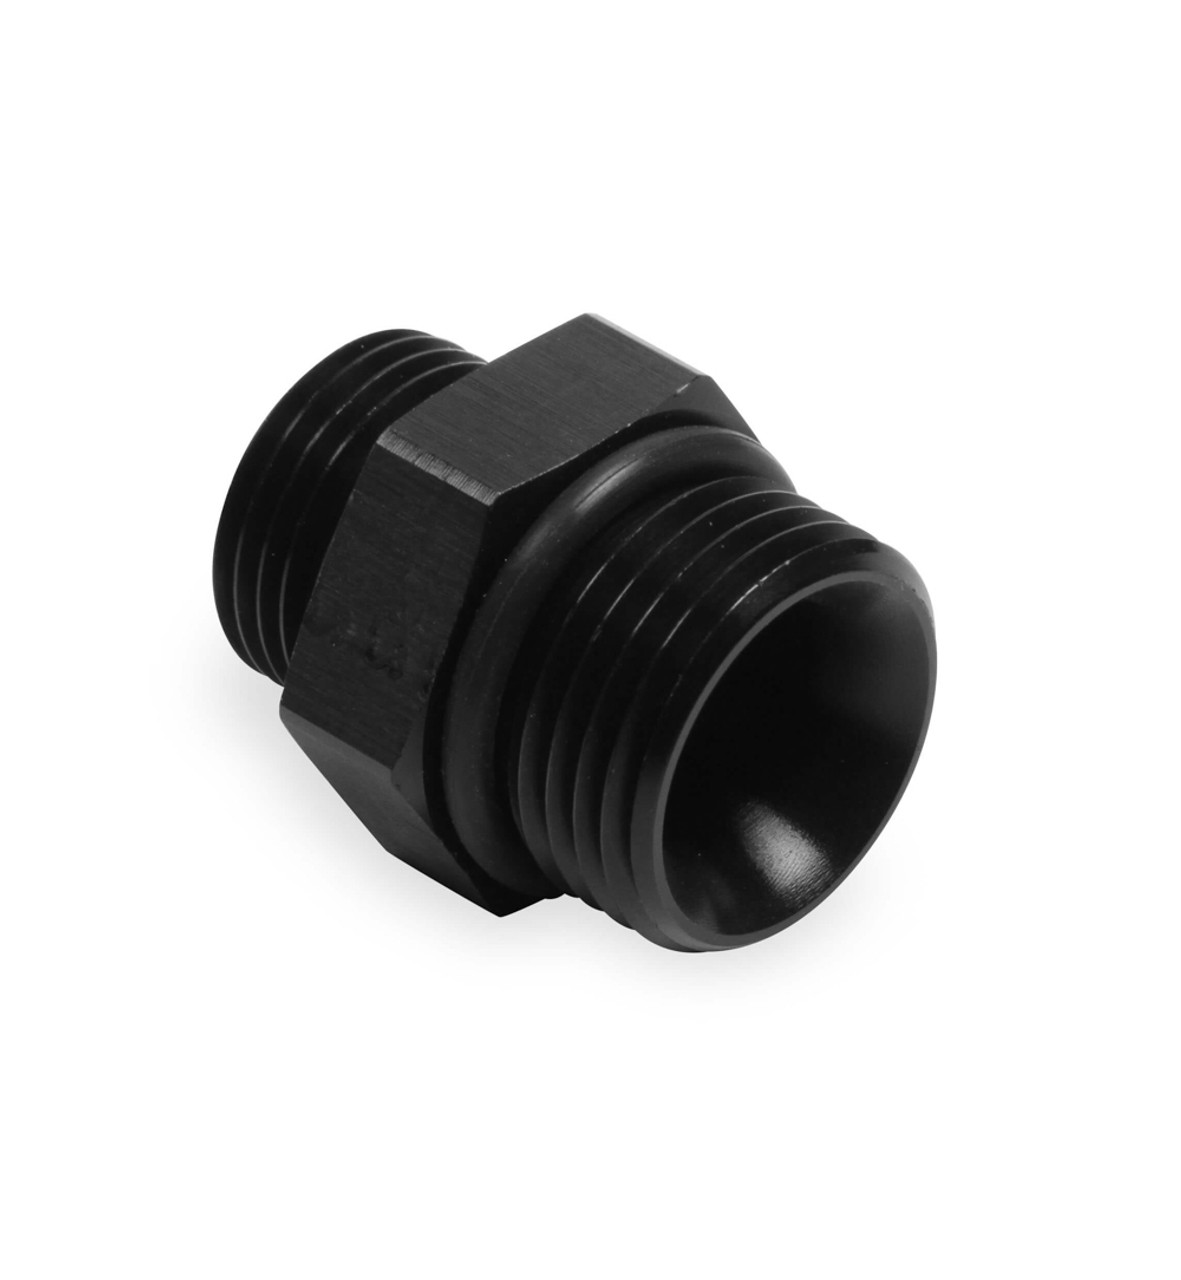 Holley 10an ORB Port to 10an ORB Port Adapter Fitting